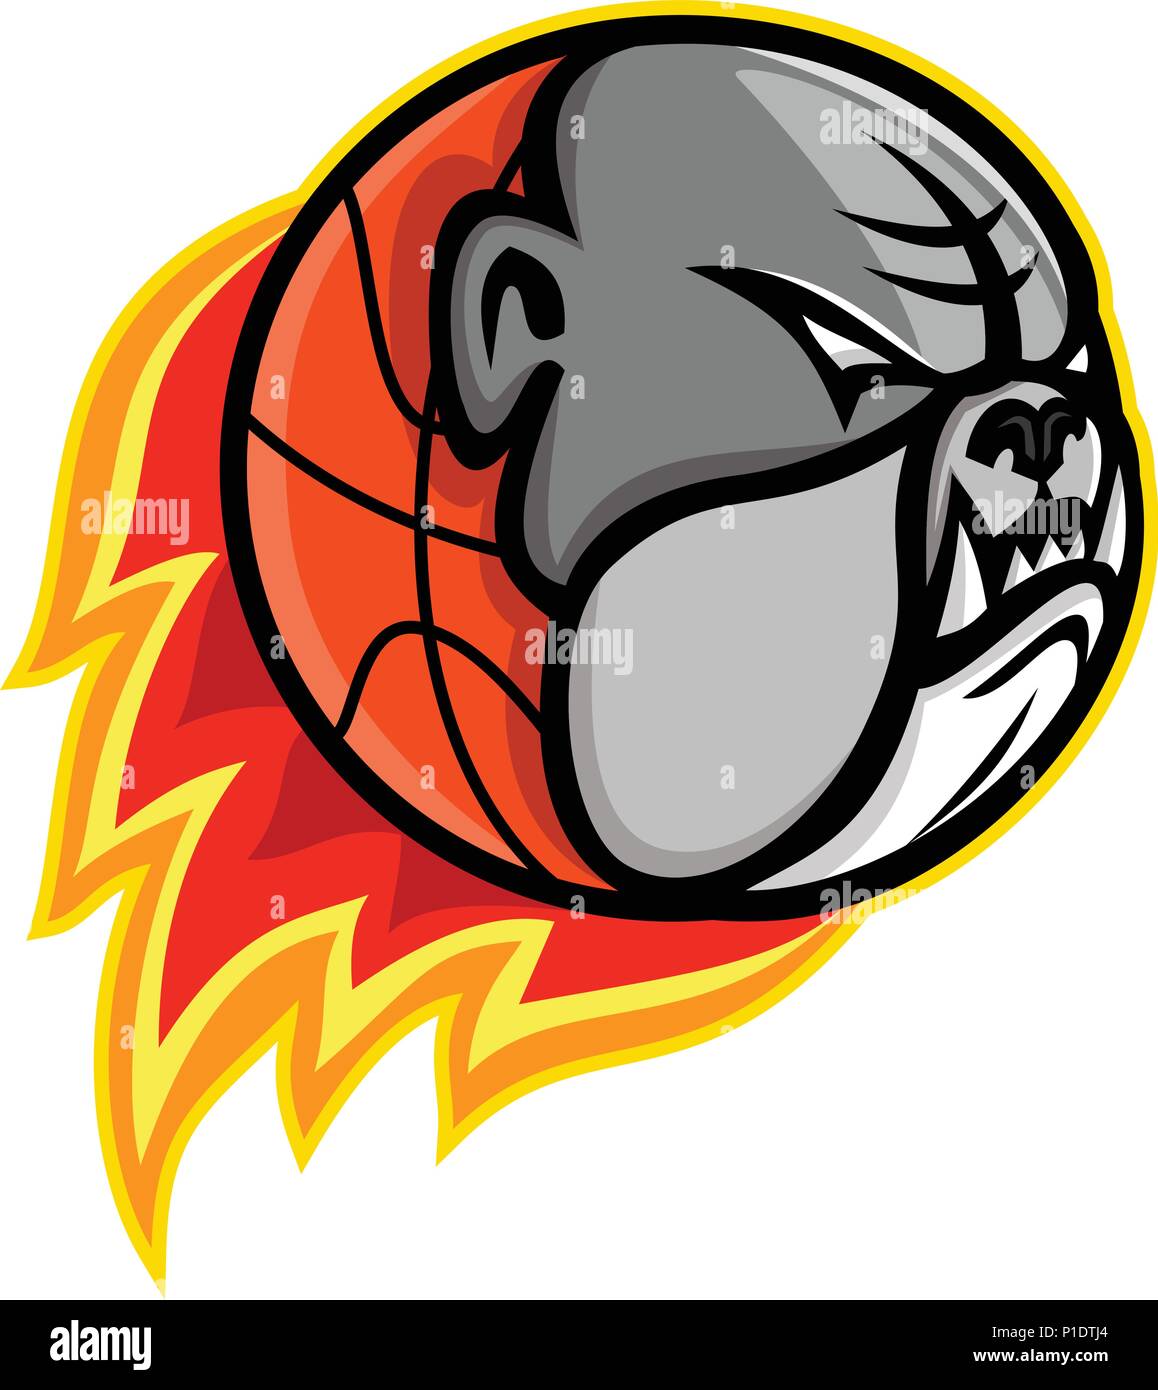 Sports mascot icon illustration of head of a bulldog on blazing or flaming basketball ball on fire viewed from side on isolated background in retro st Stock Vector